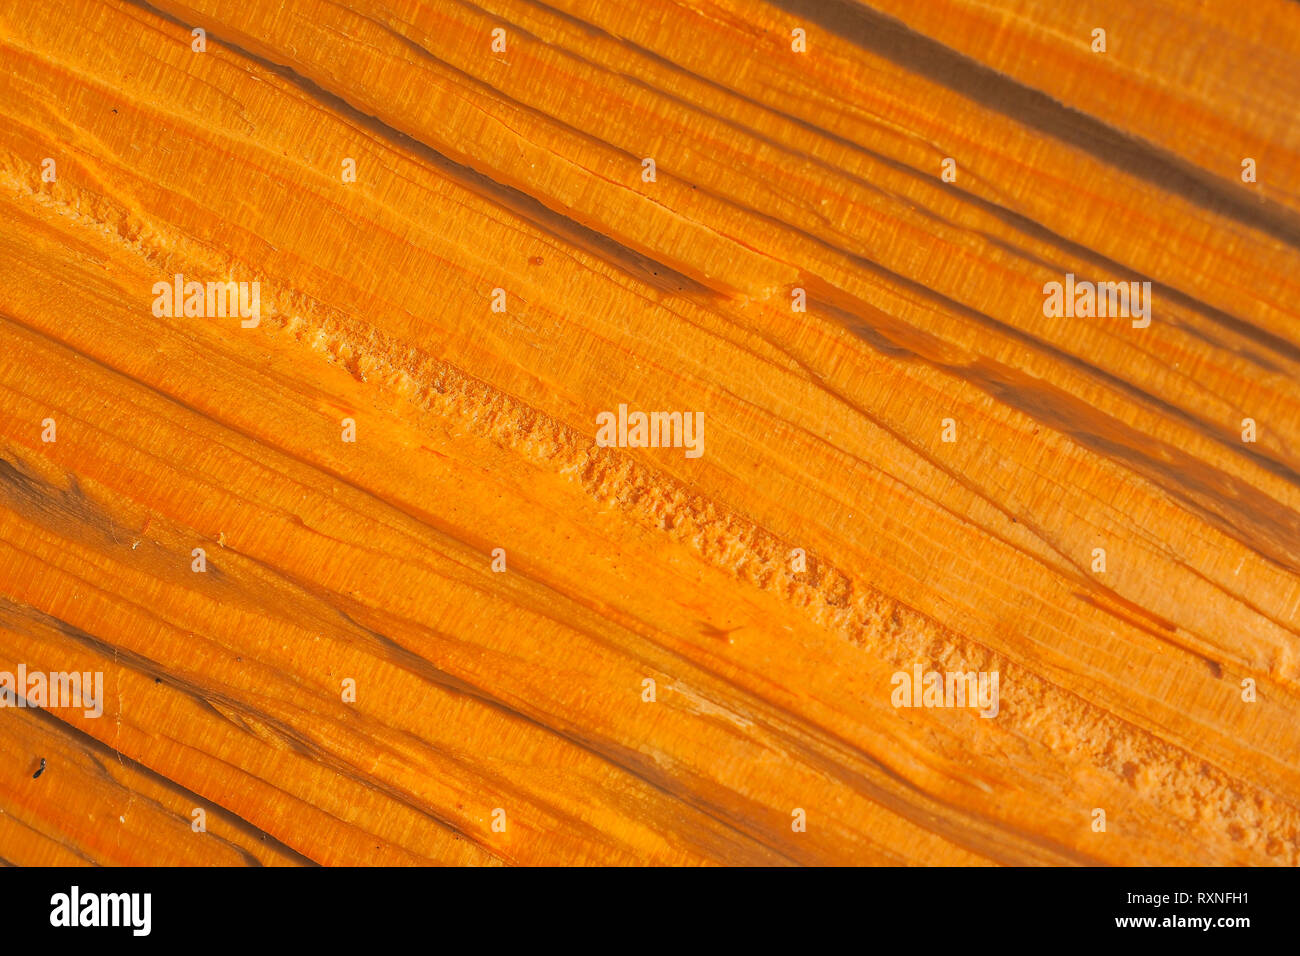 Norway spruce (Picea abies) wood Stock Photo